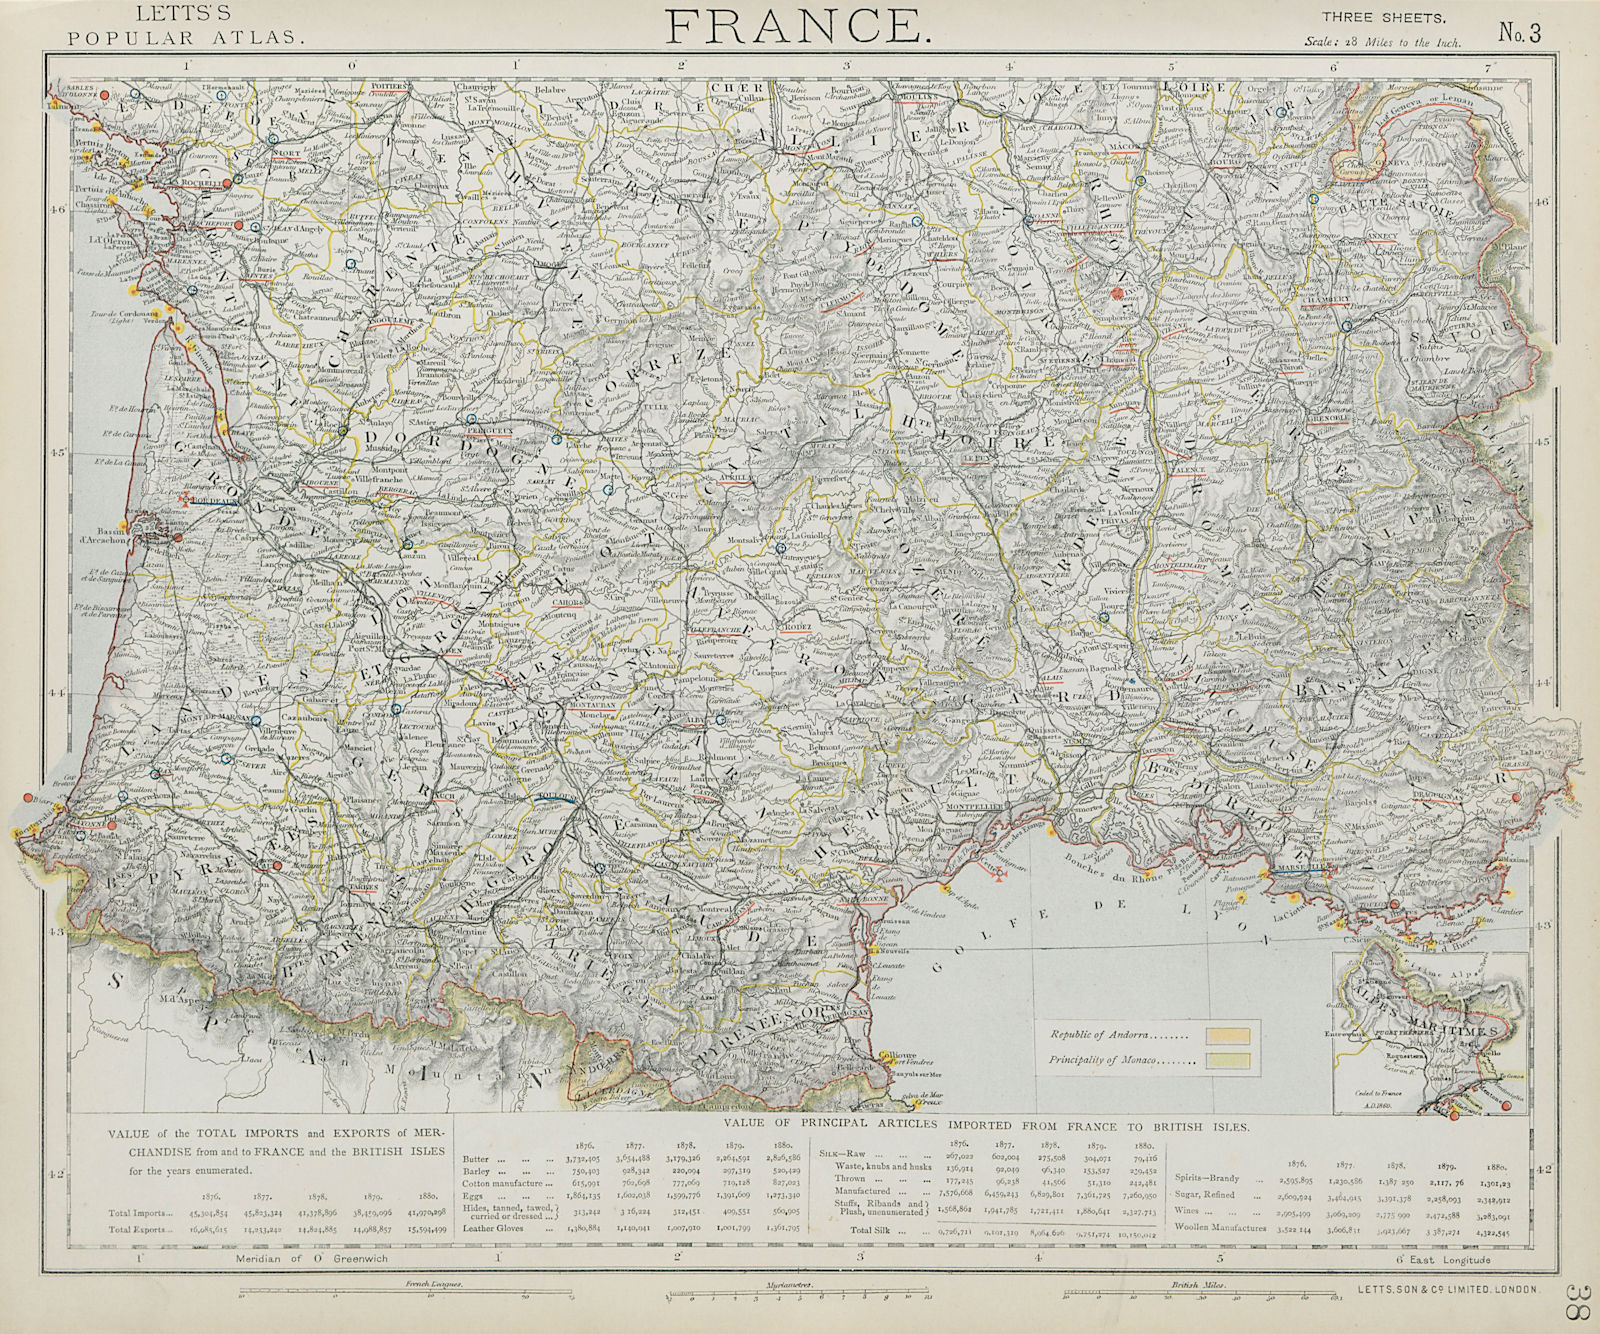 Associate Product FRANCE SOUTH. Lighthouses. UK-French trade 1876-1880. LETTS 1884 old map